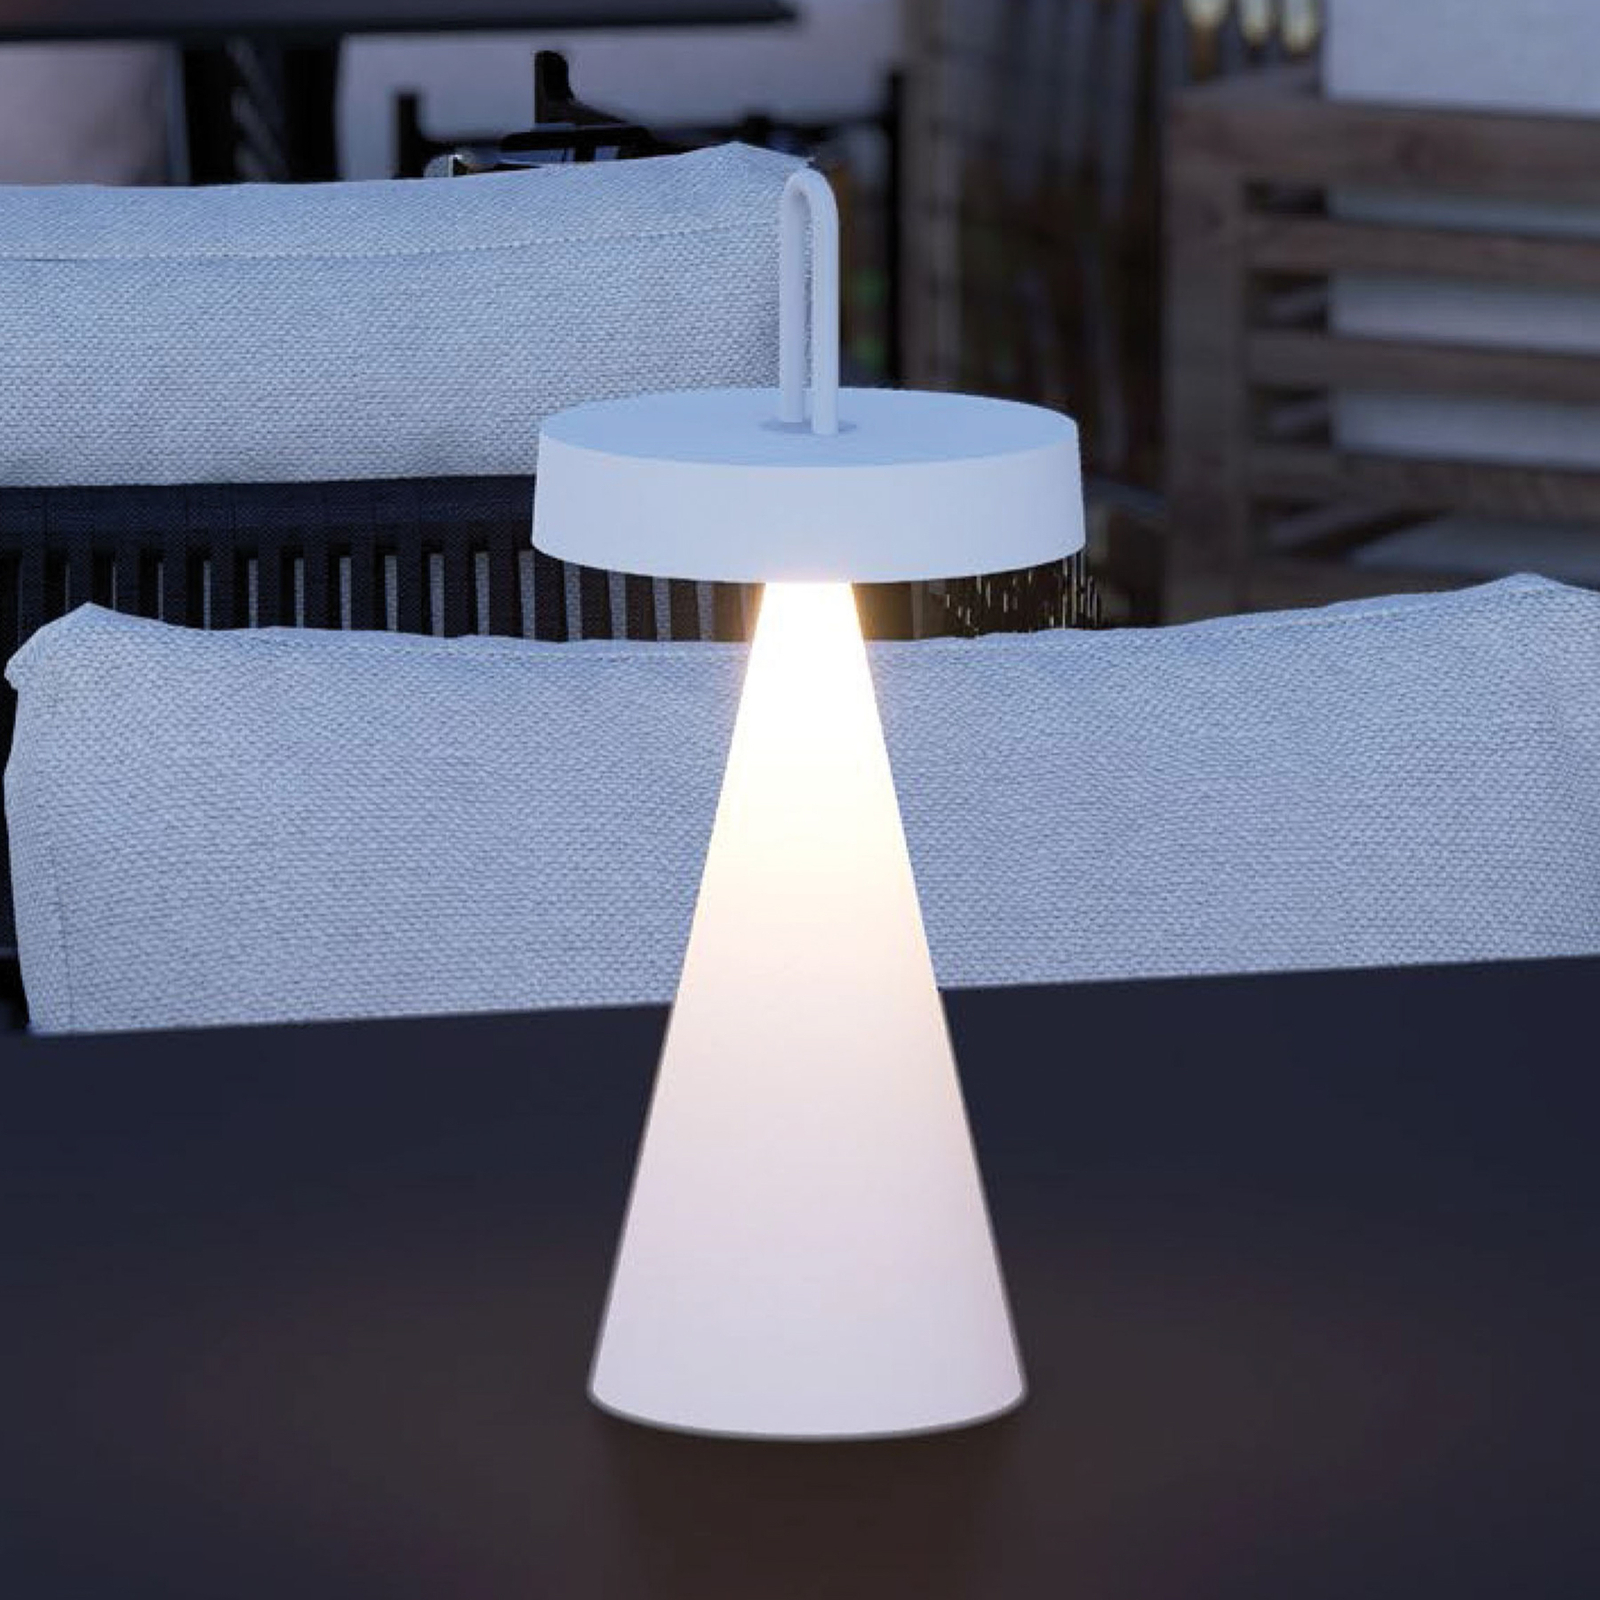 JUST LIGHT. Lampe de table LED rechargeable Alwa, blanc, fer, IP44